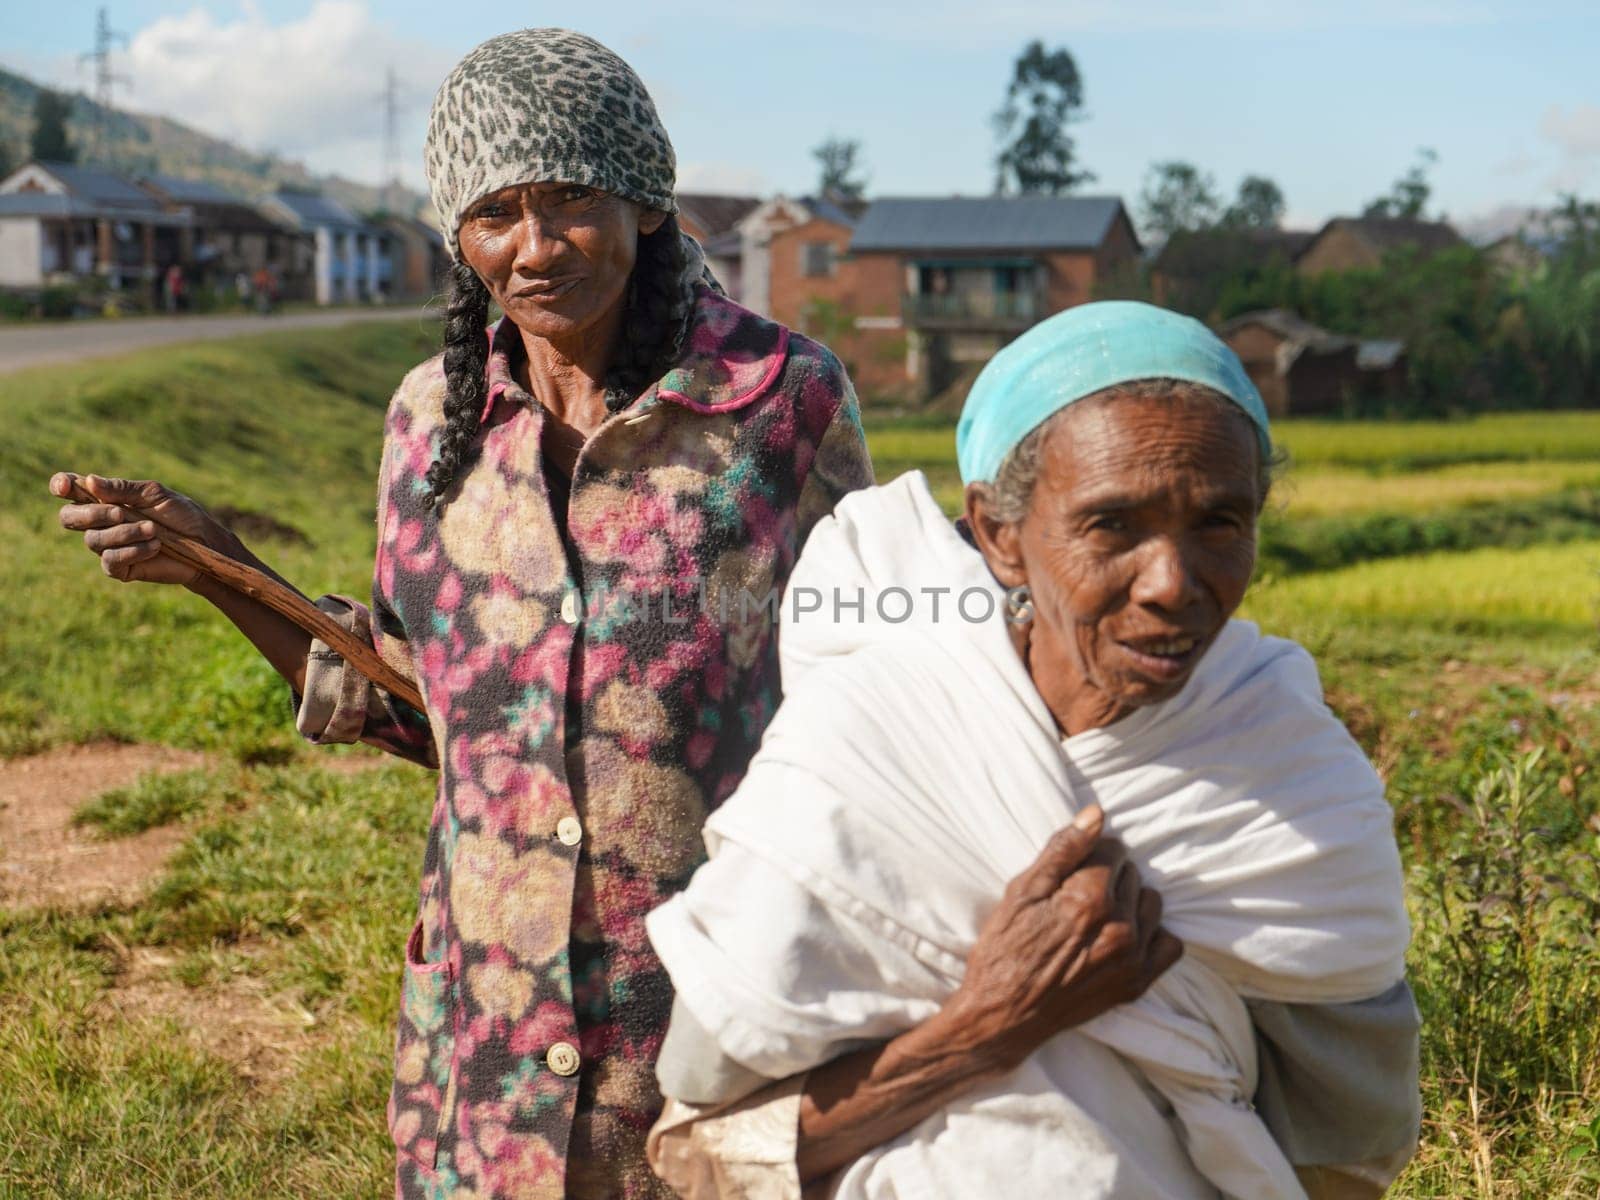 Manandoana, Madagascar - April 26, 2019: Unknown senior Malagasy women standing next to rice field where they worked on sunny day. People in this part of Africa are poor, but cheerful. by Ivanko